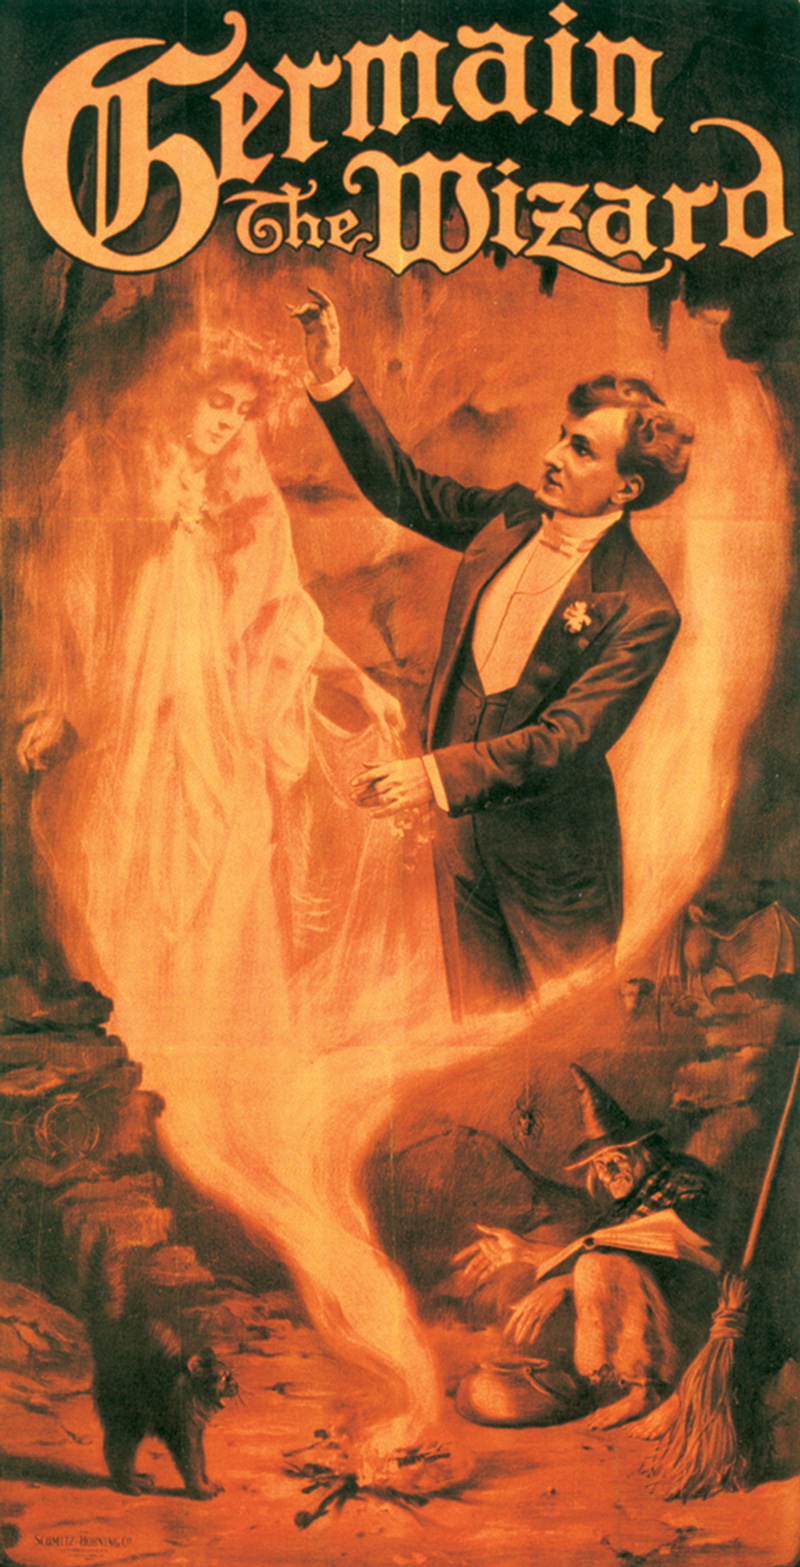 A publicity poster for US magician Germain the Wizard (Charles Mattmueller, eighteen seventy eight to nineteen fifty nine). A witch looks on as Germain conjures a female spirit from the fire.